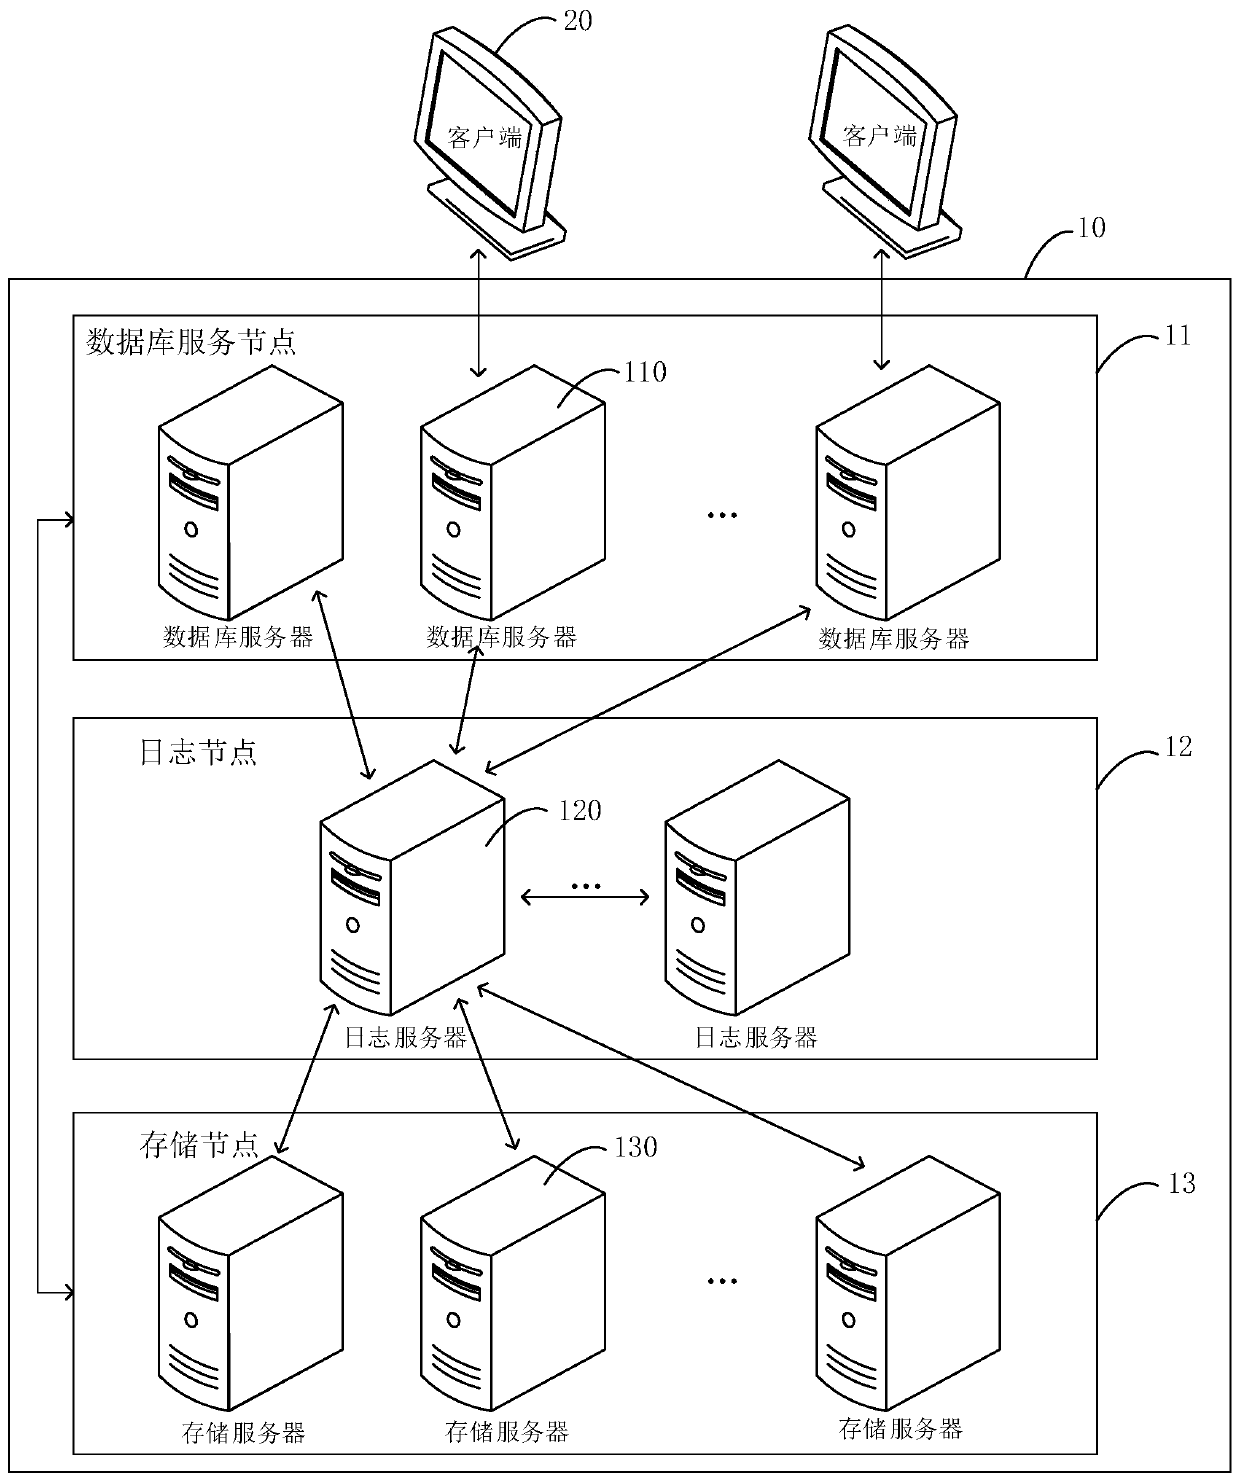 Distributed database management system, method and device and storage medium